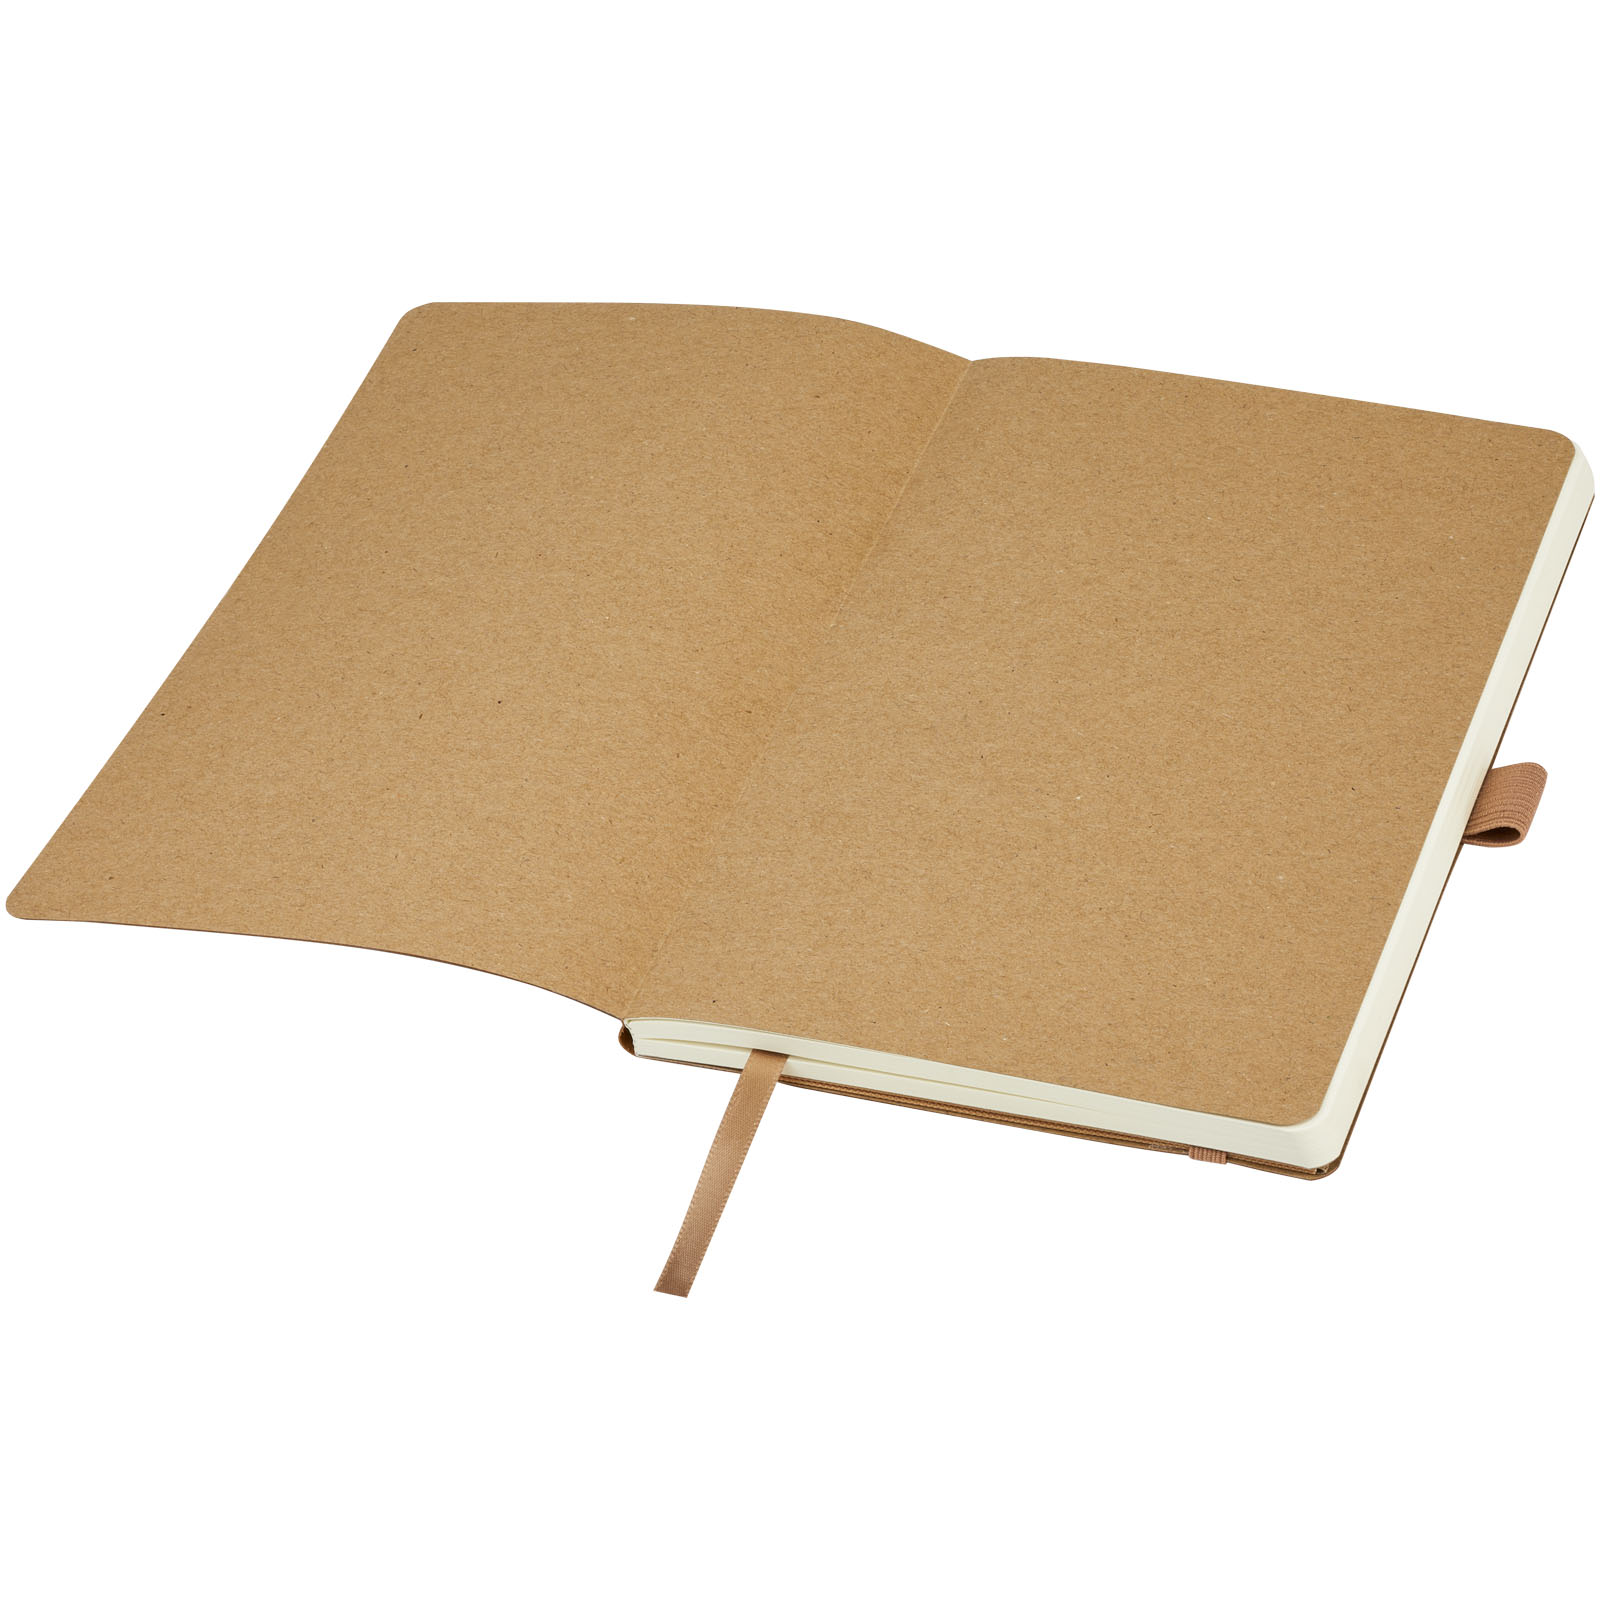 Advertising Soft cover notebooks - Kilau recycled leather notebook  - 4